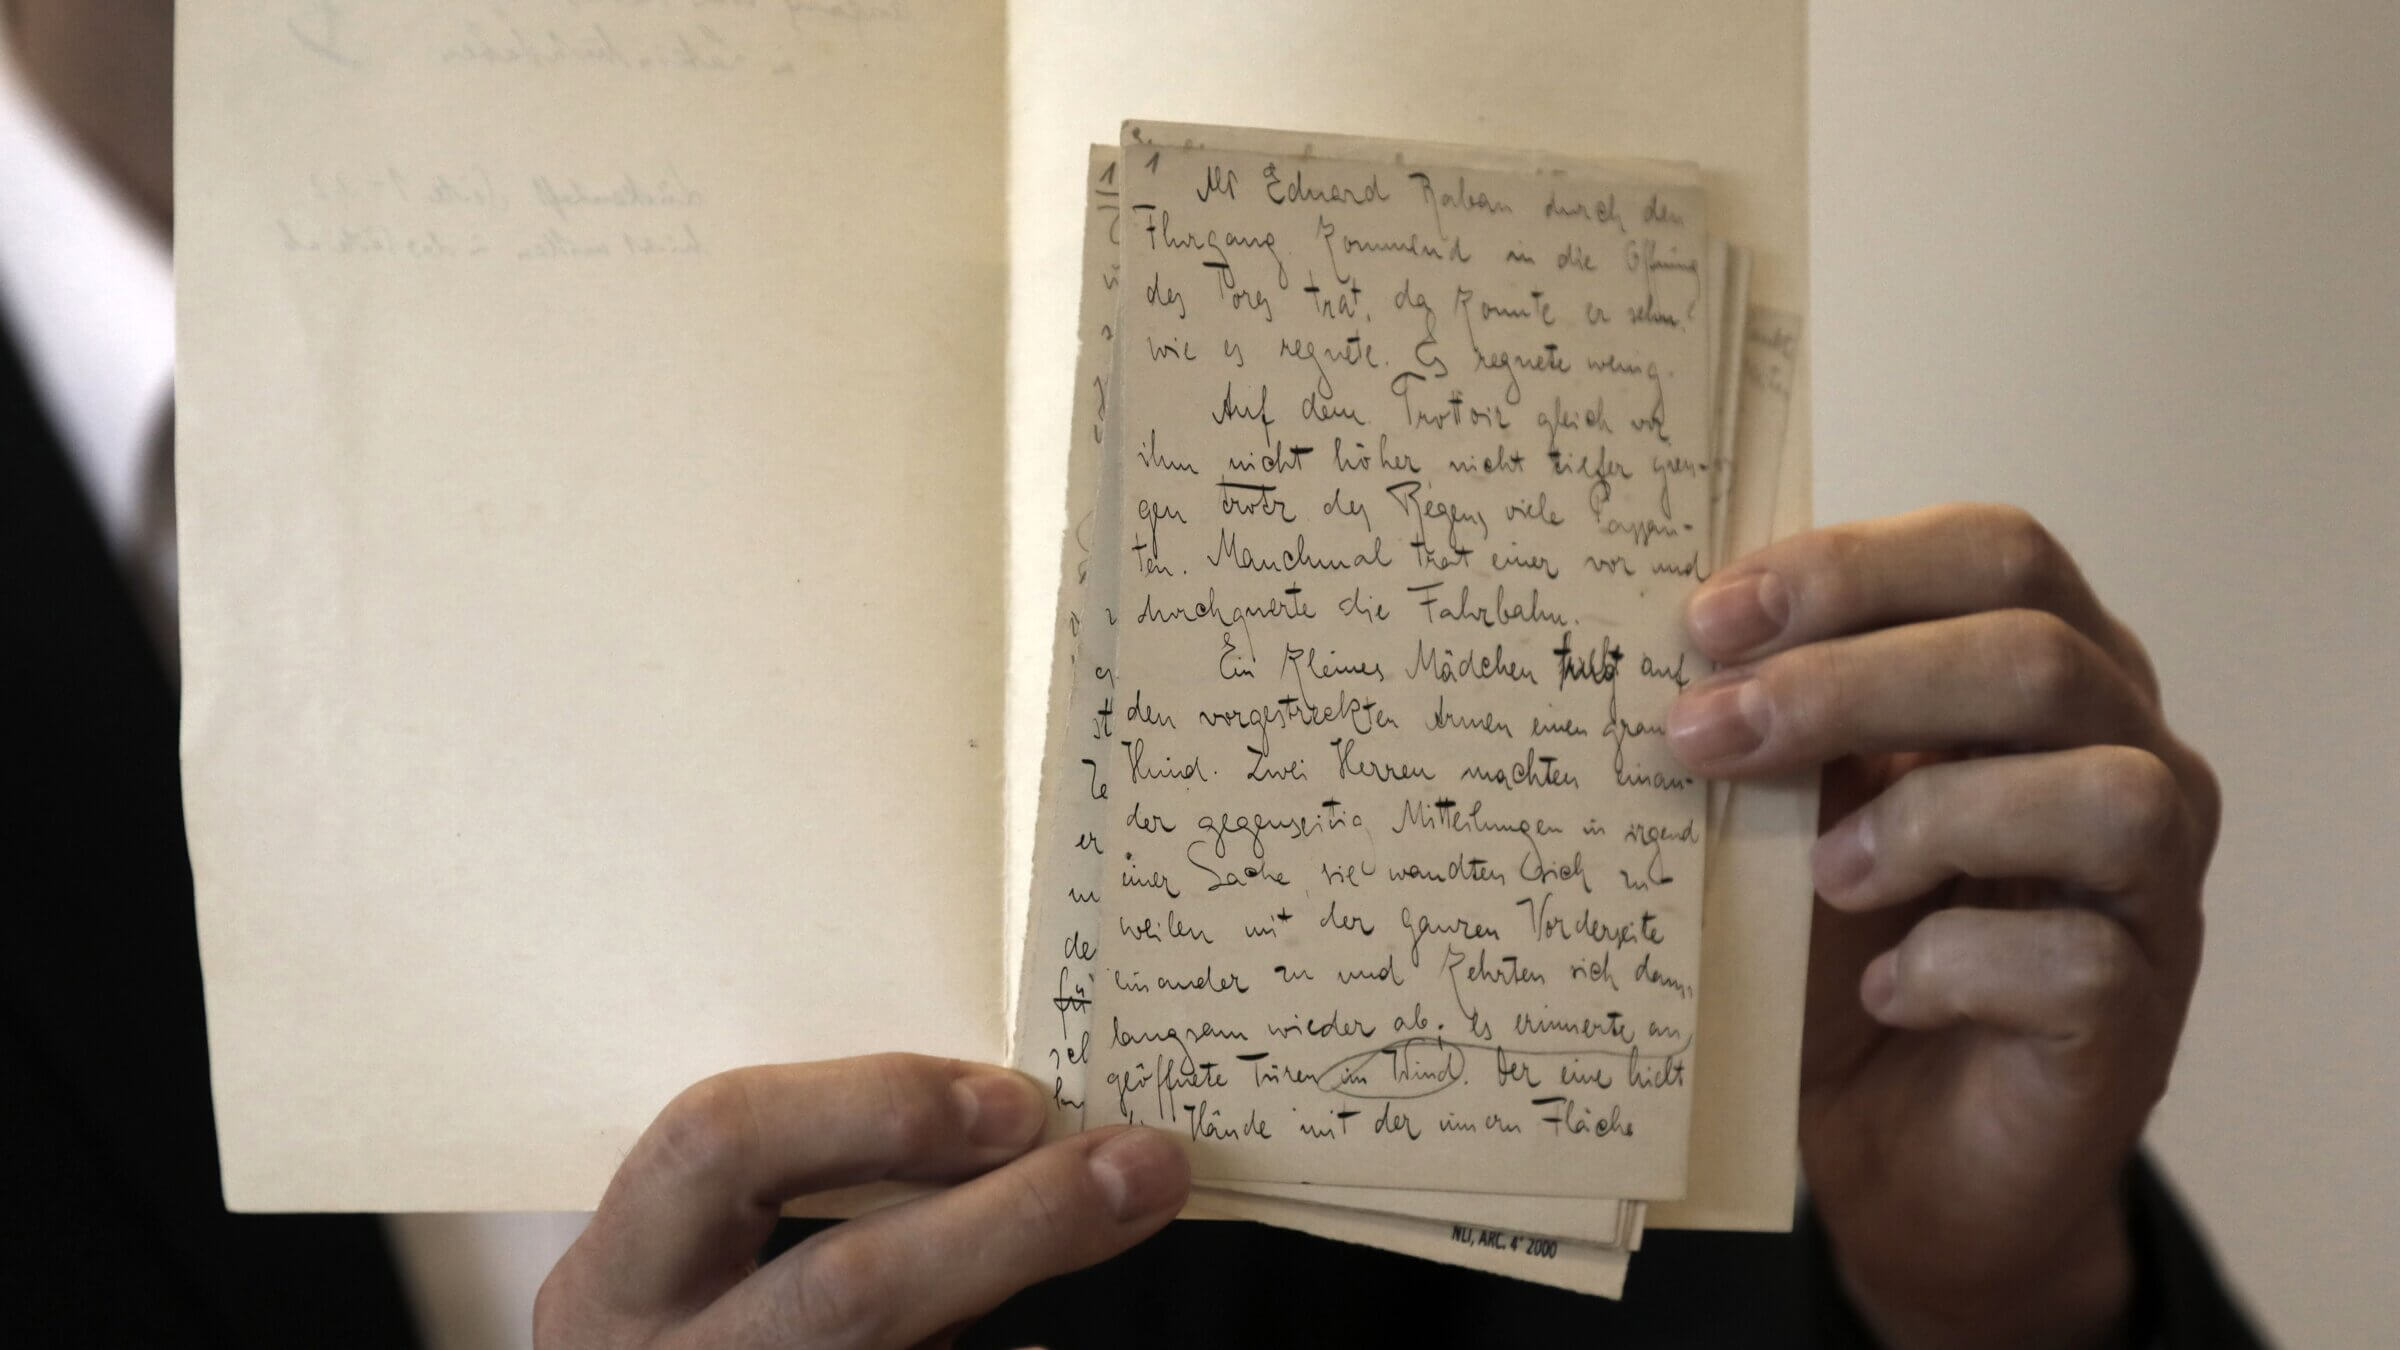 Franz Kafka's manuscripts are displayed during a 2019 press conference at the National Library of Israel in Jerusalem.